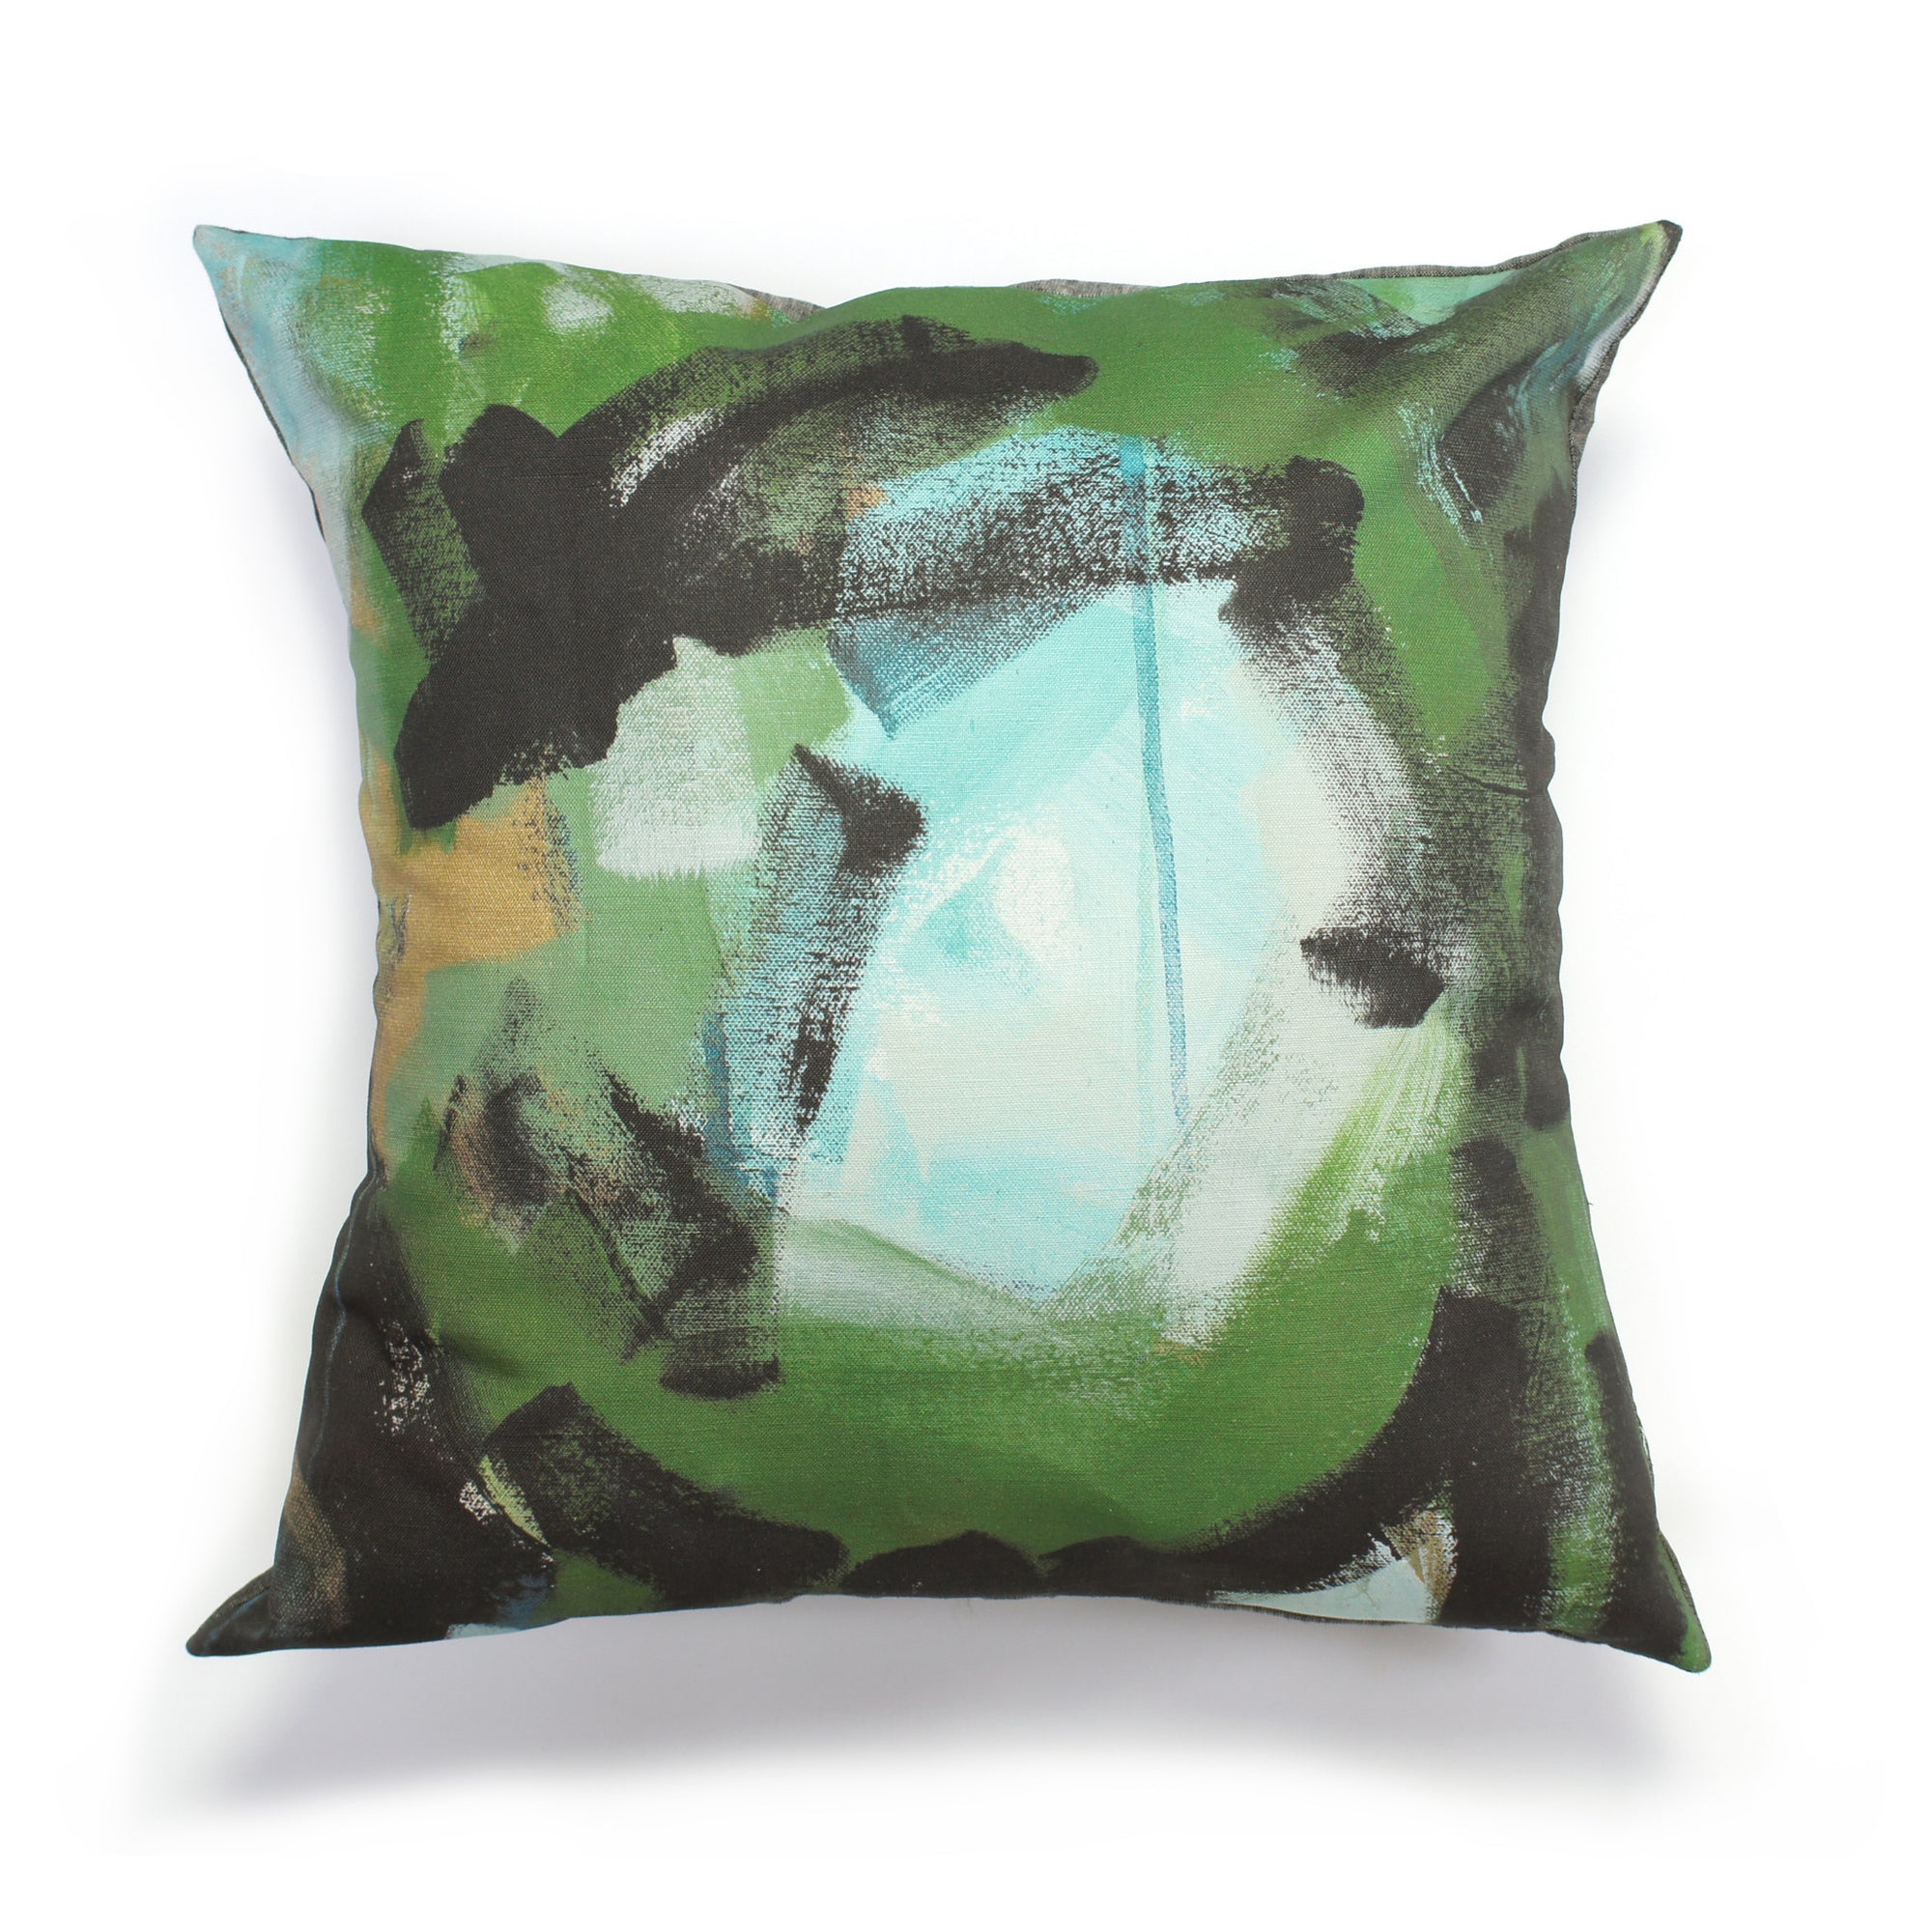 Wellspring Pillow - square